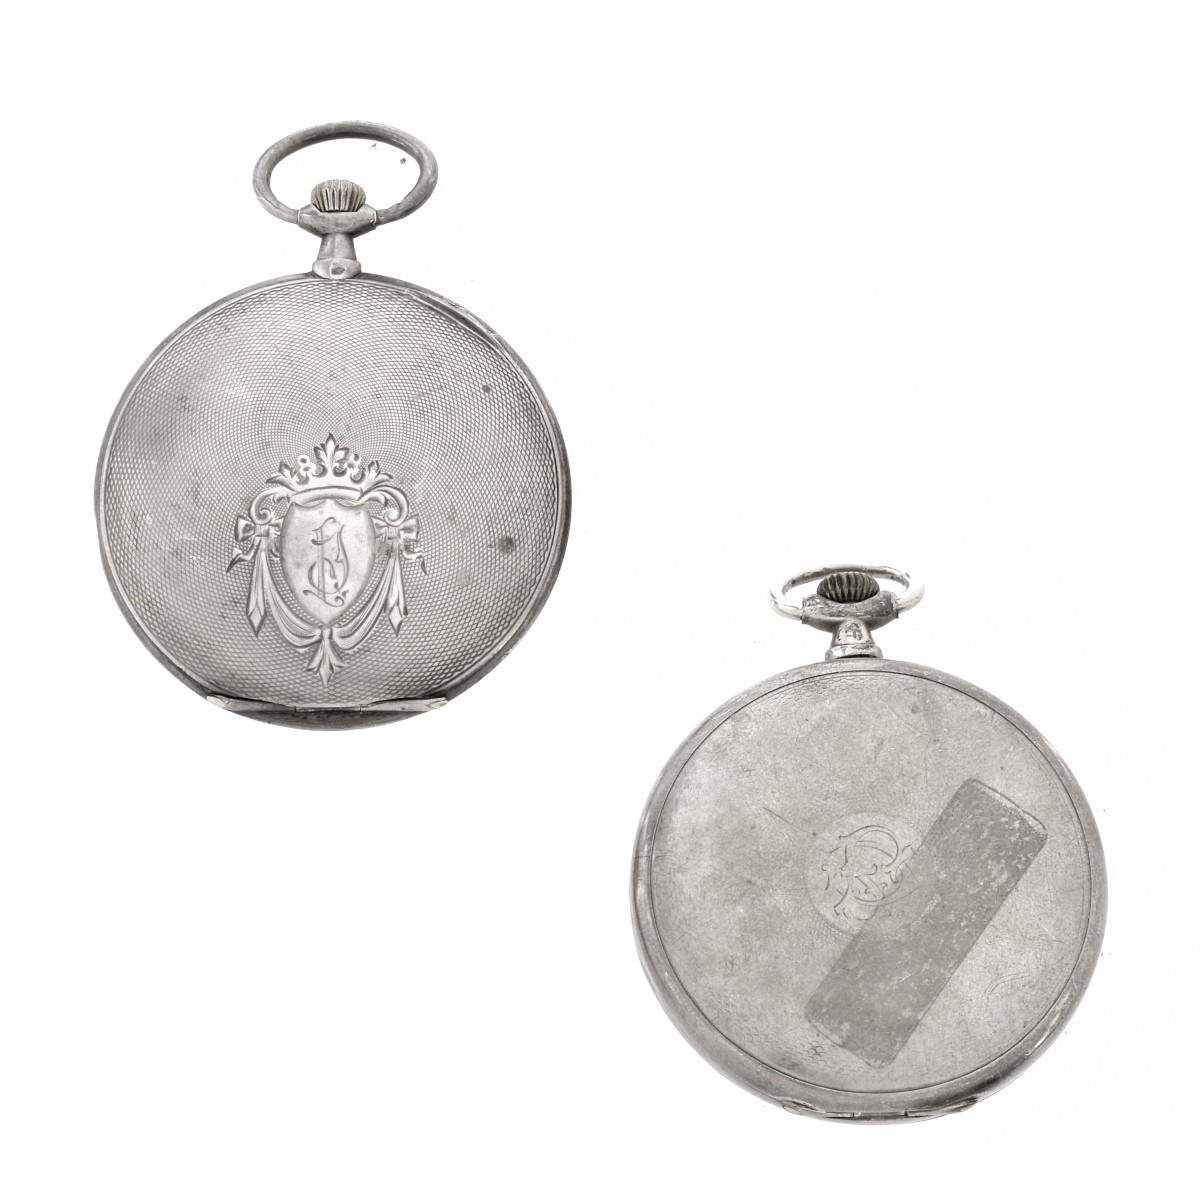 Two Antique Silver Pocket Watches